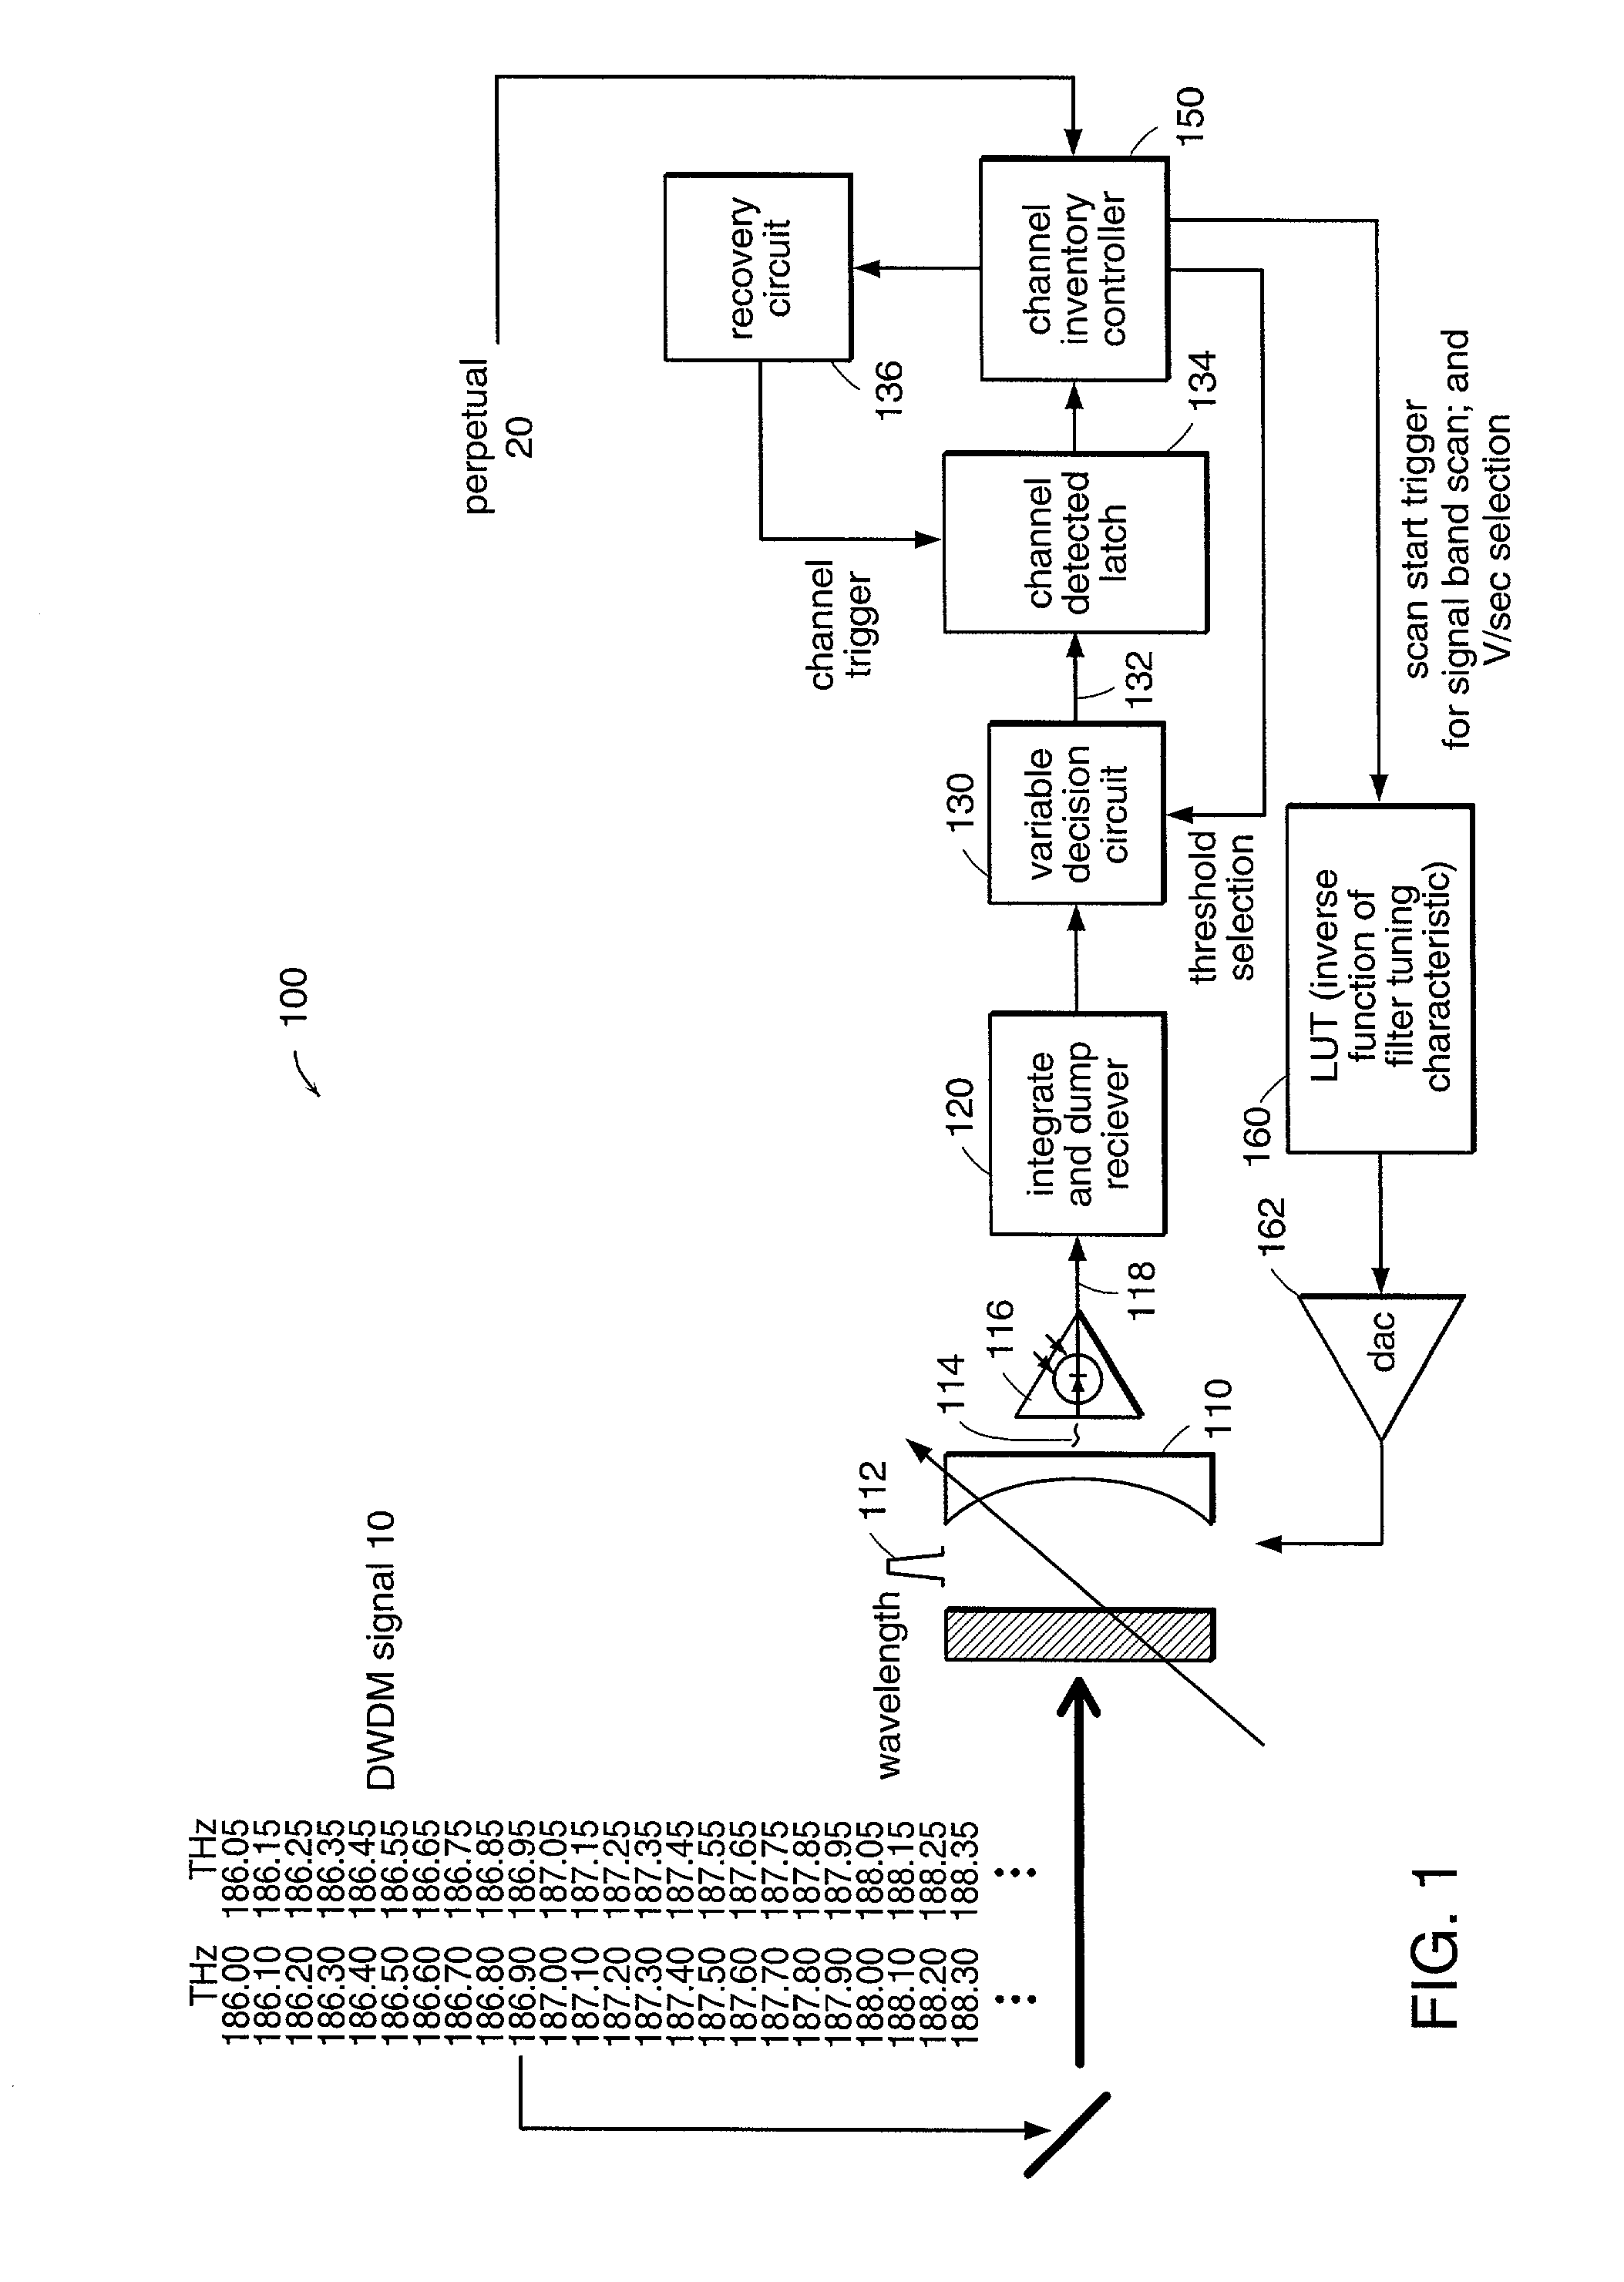 Optical band scanning monitor system and method